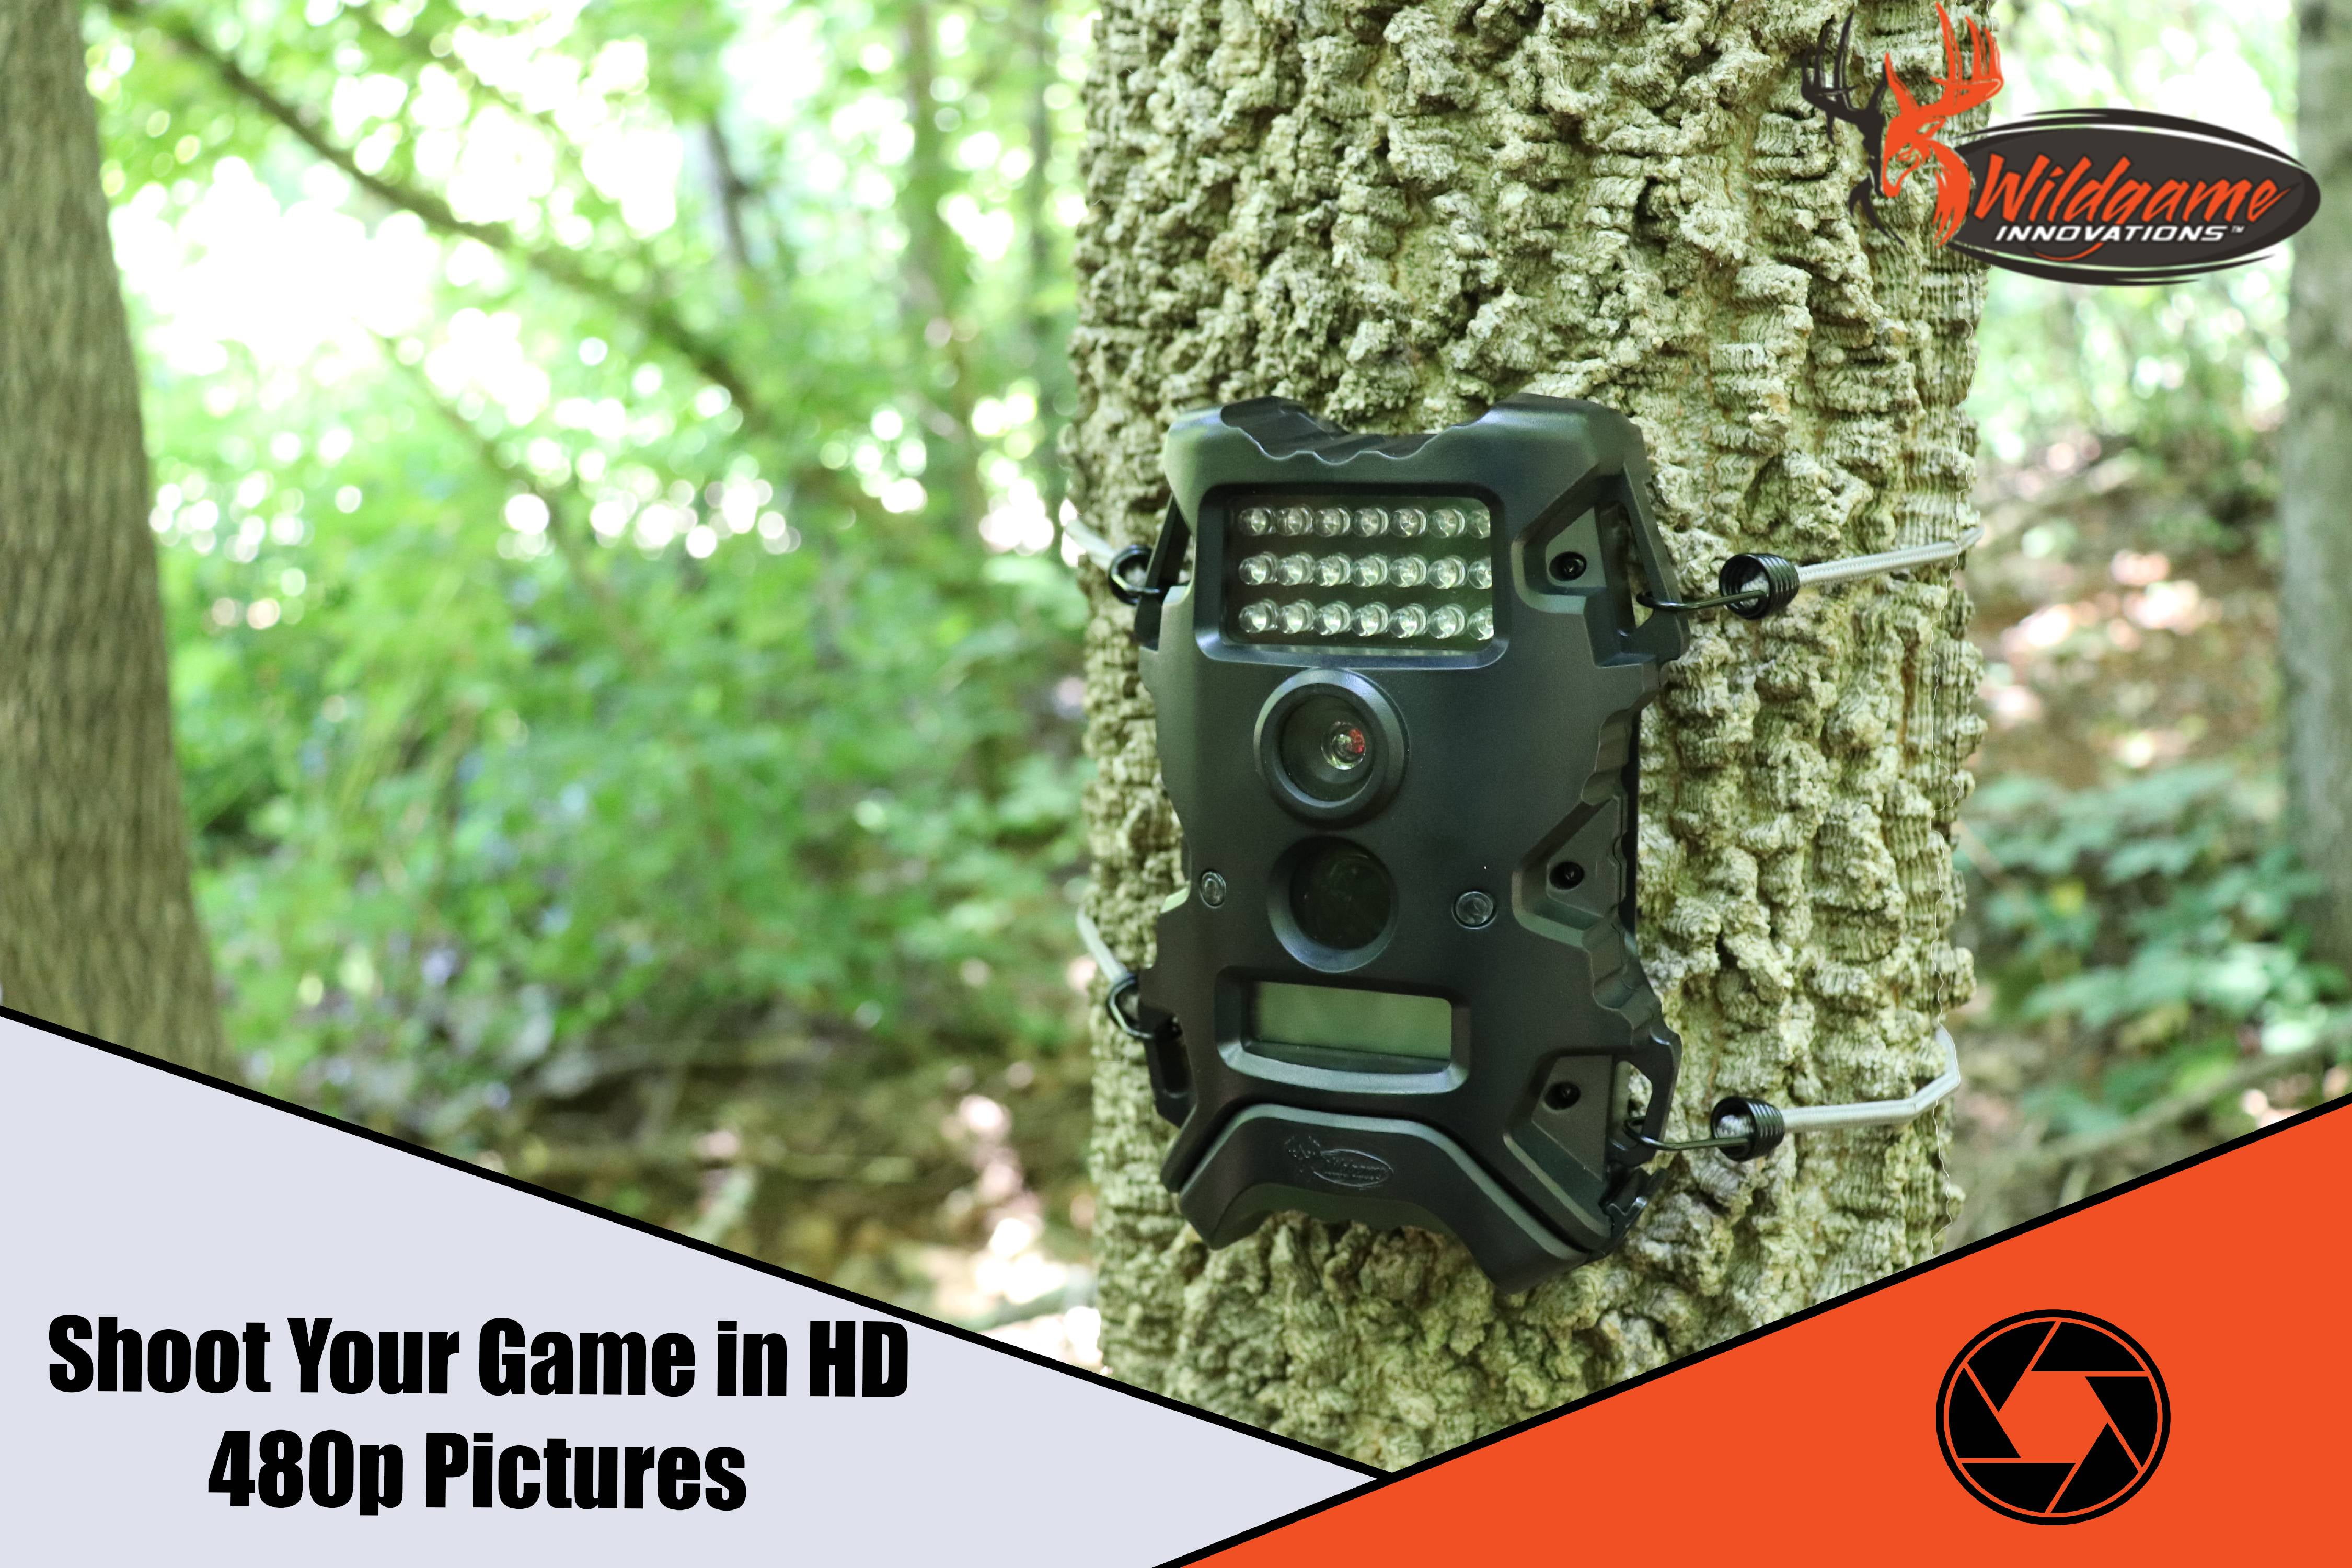 how to format sd card for wildgame innovations camera